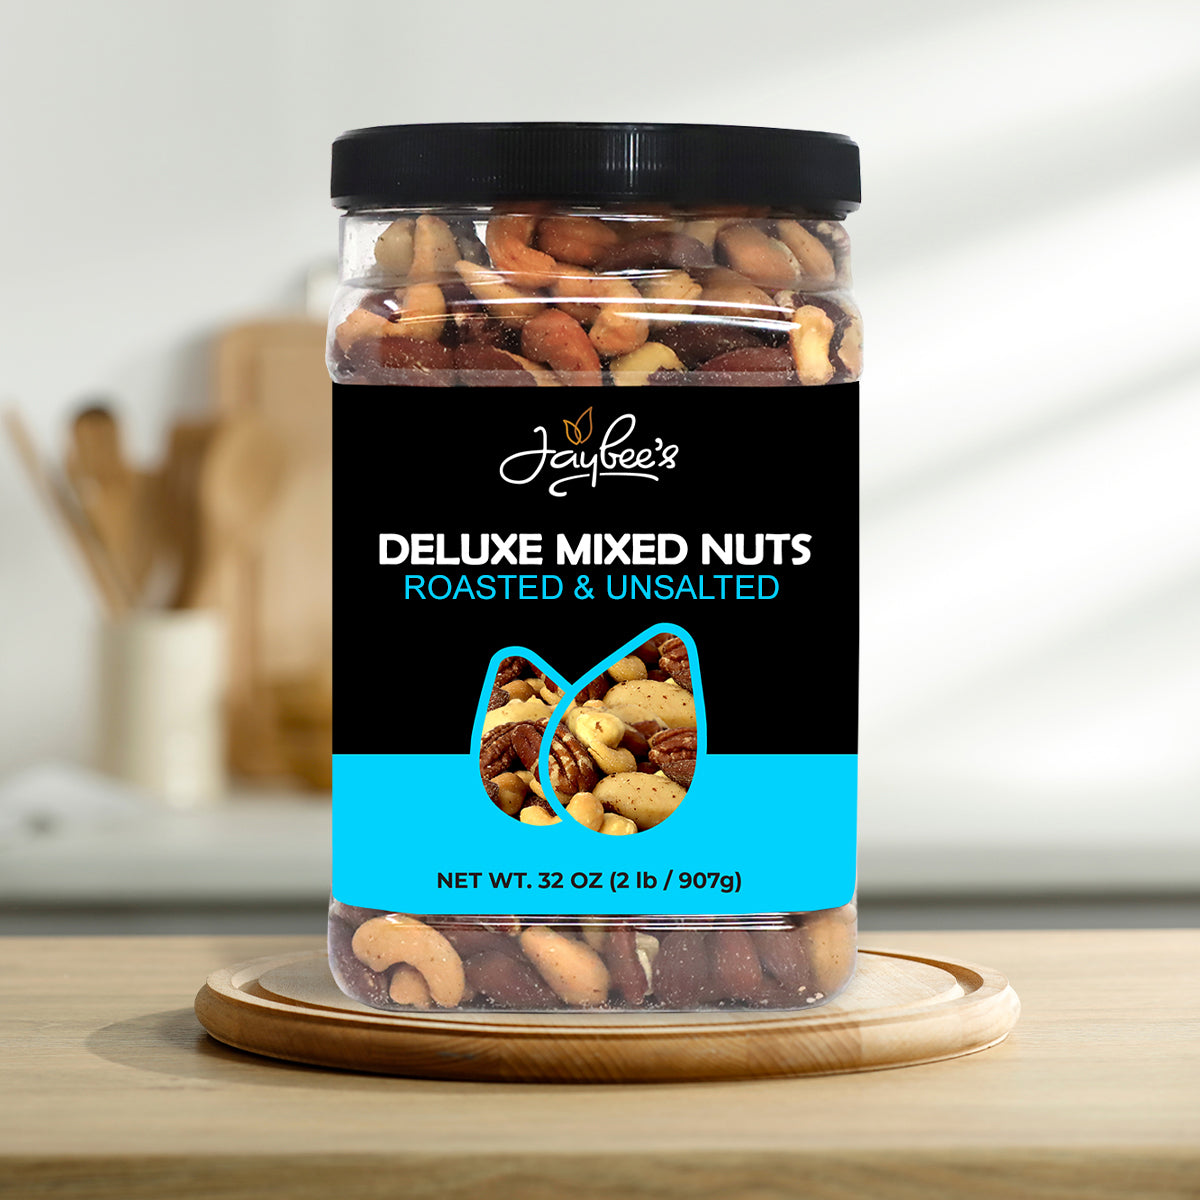 Deluxe Mixed Nuts - Roasted & Unsalted